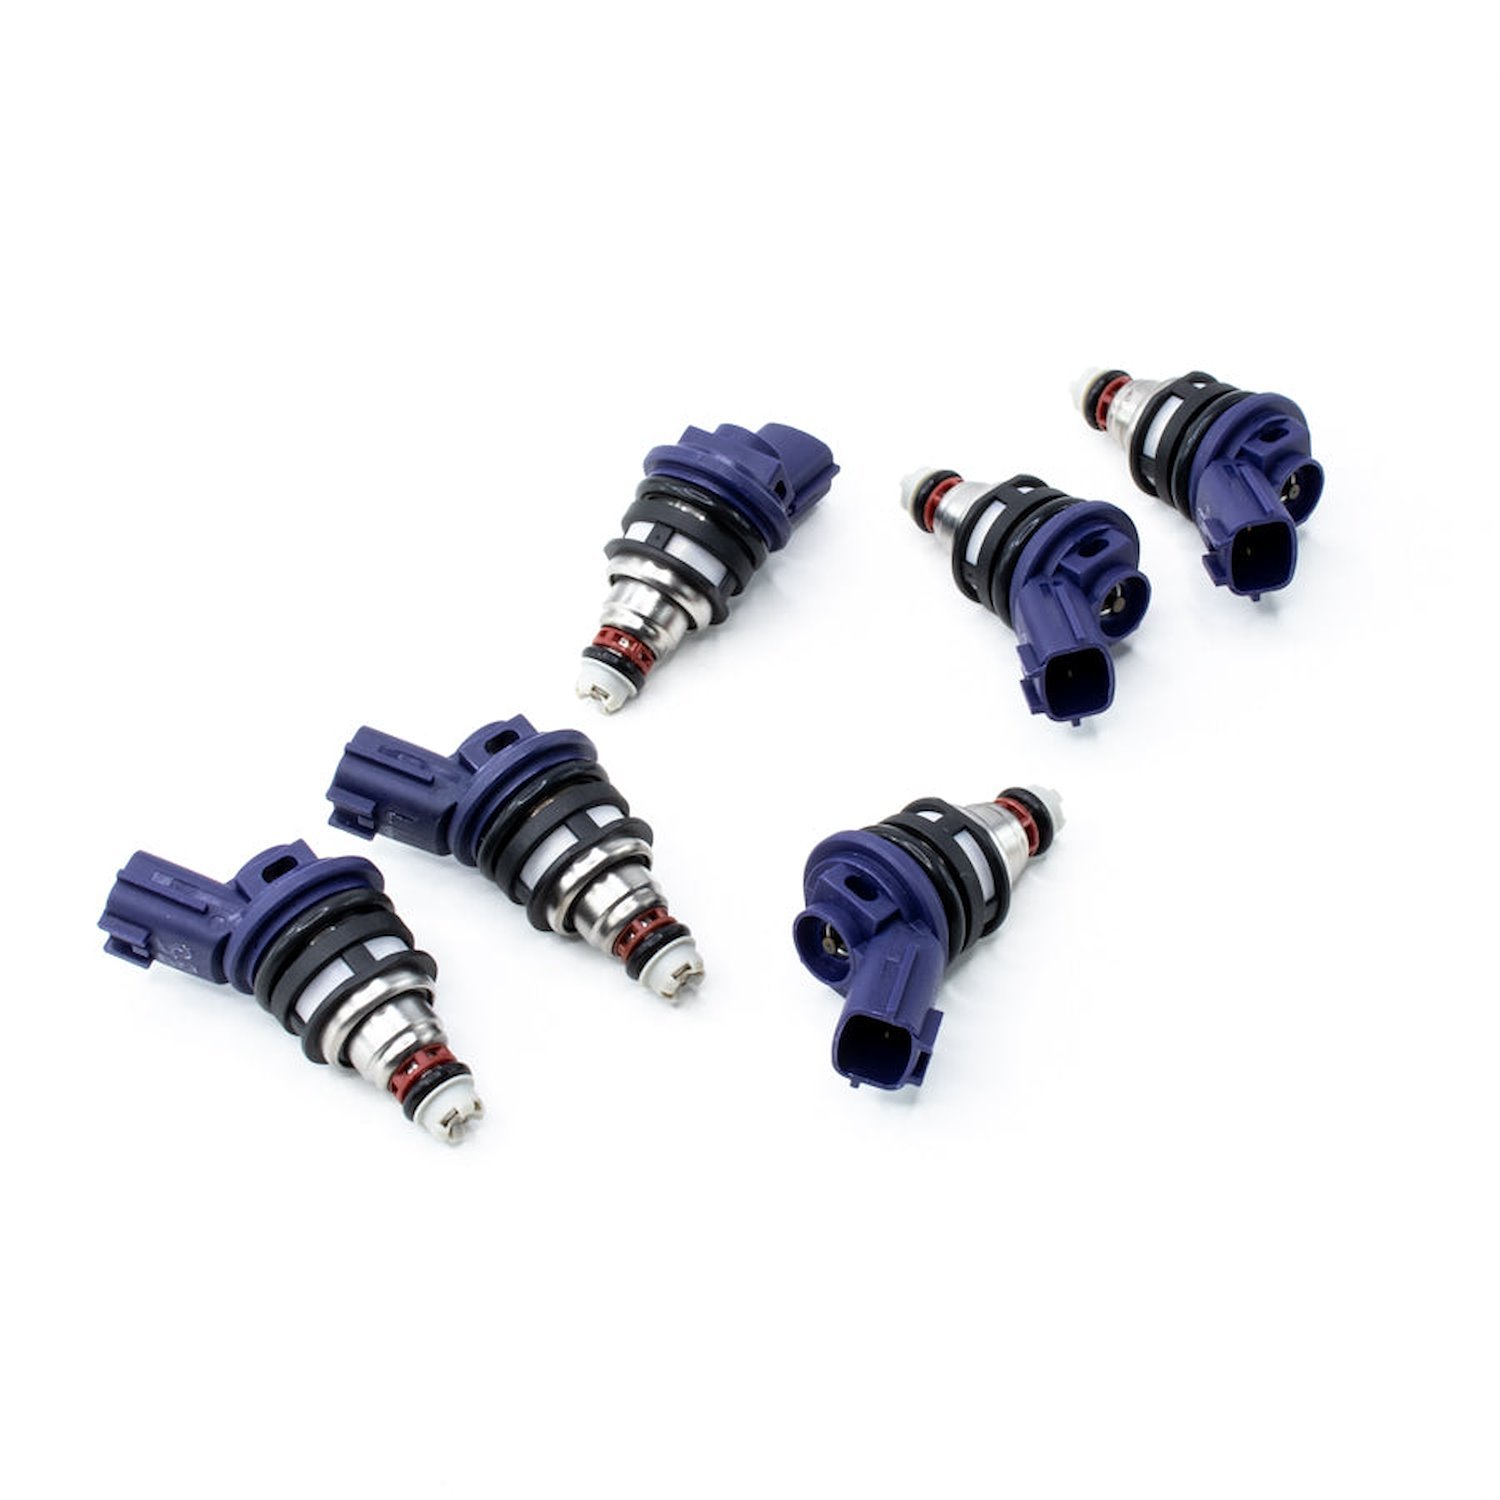 01J0003706 370cc Side Feed Injectors for Nissan 300zx 90-99 and Skyline RB25DET 93-98